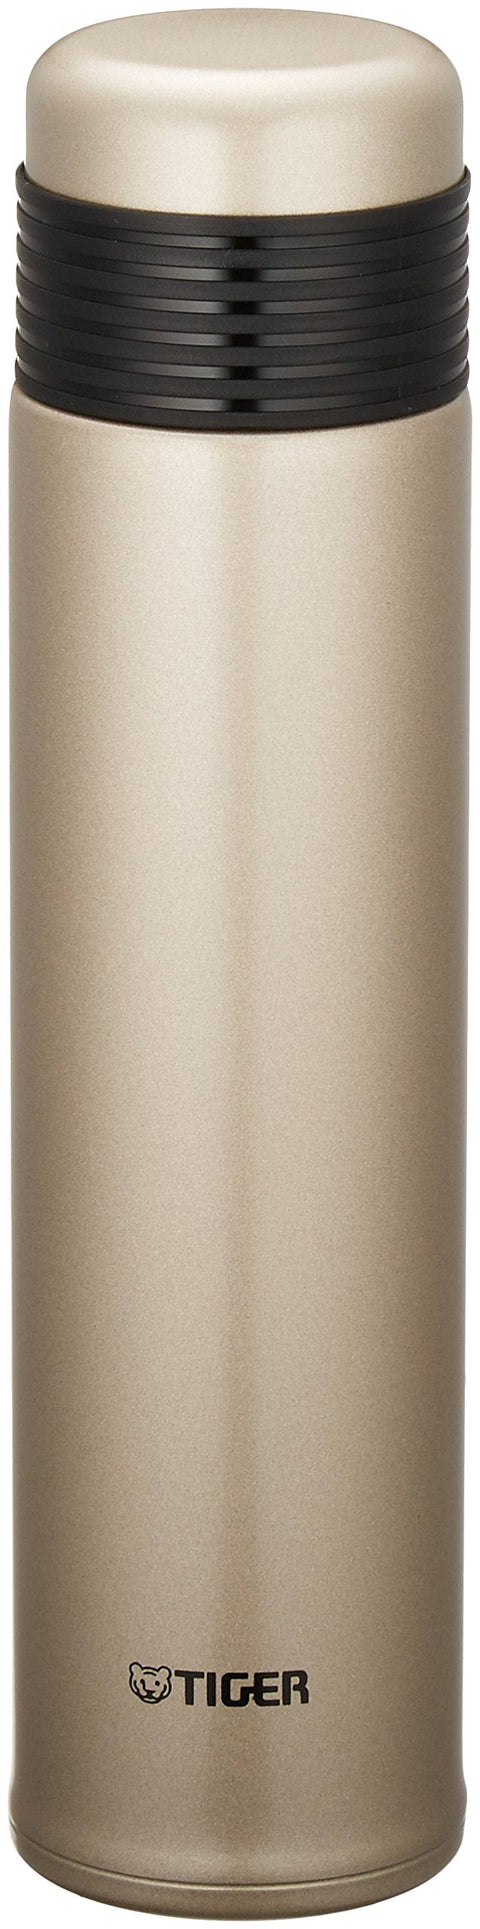 Tiger Water Bottle 500Ml Stainless Bottle With Cup Sahara Slim Champagne Gold Mse-A050-Nt Tiger